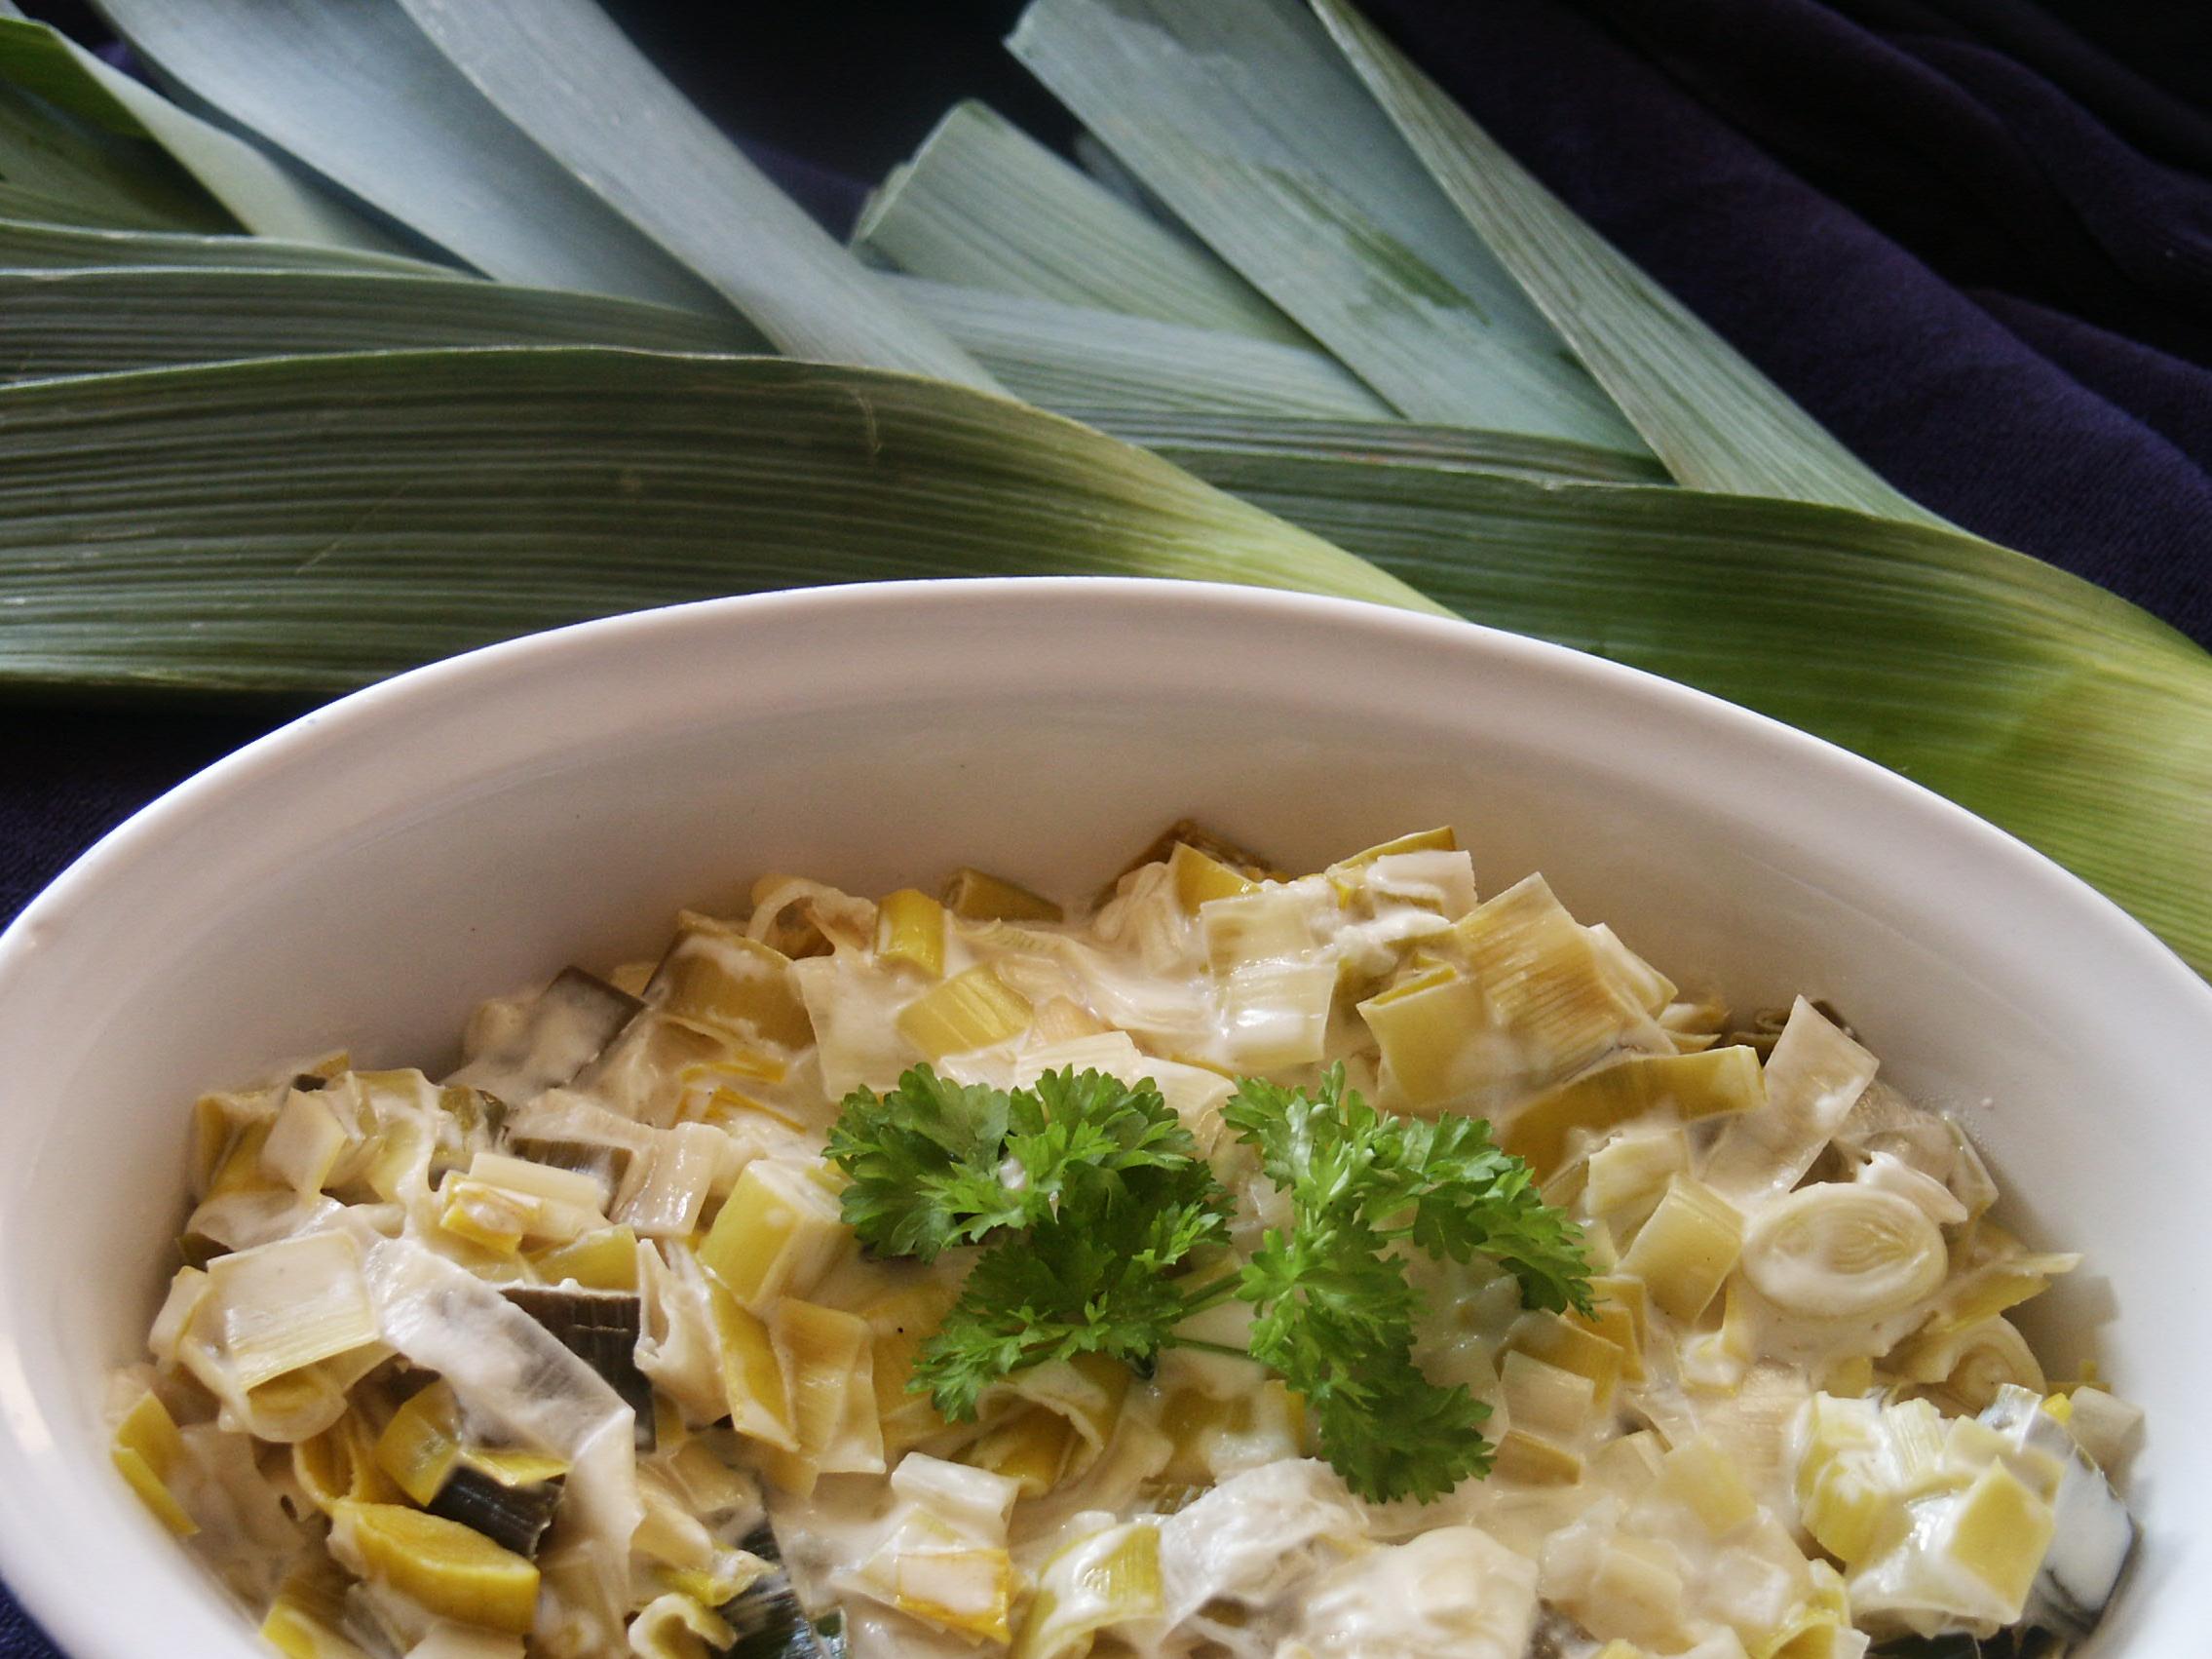  Deliciously creamy and savory, this Leeks with Creamy Wine Sauce dish will leave your taste buds dancing with joy!